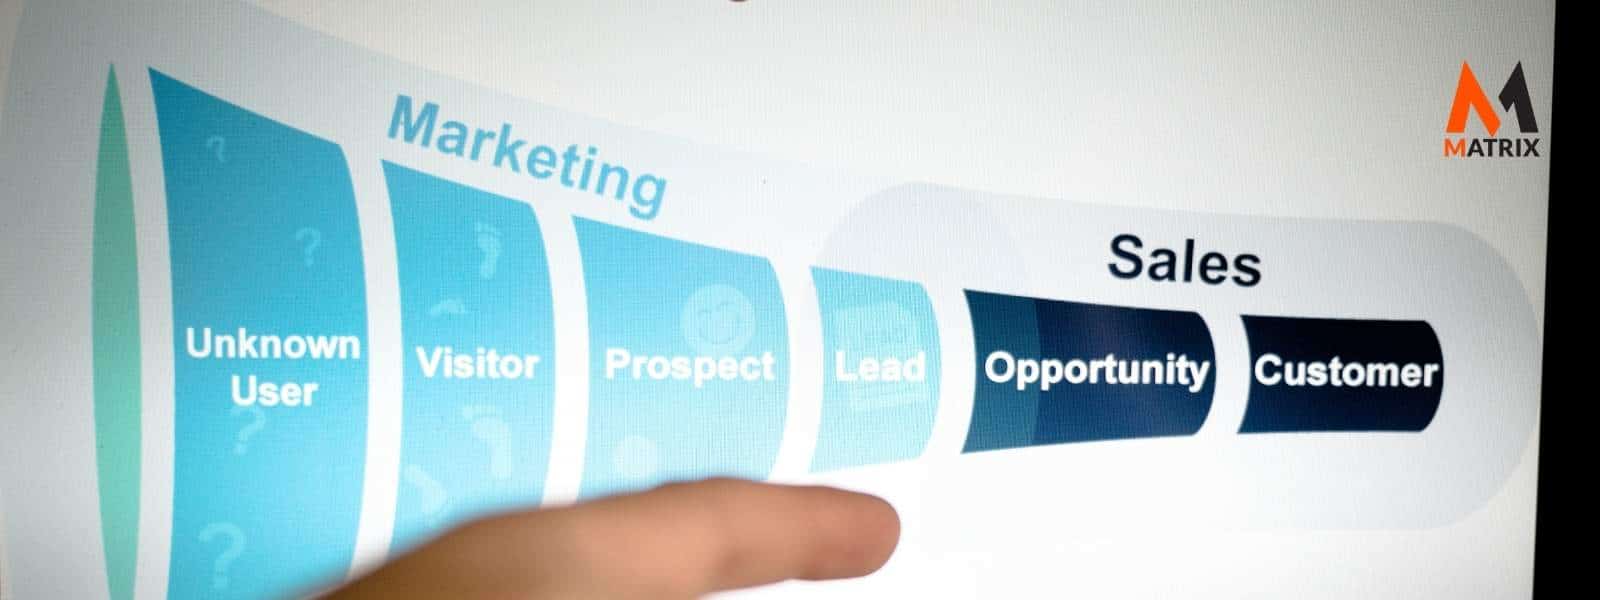 execute a top-of-the-funnel marketing campaign